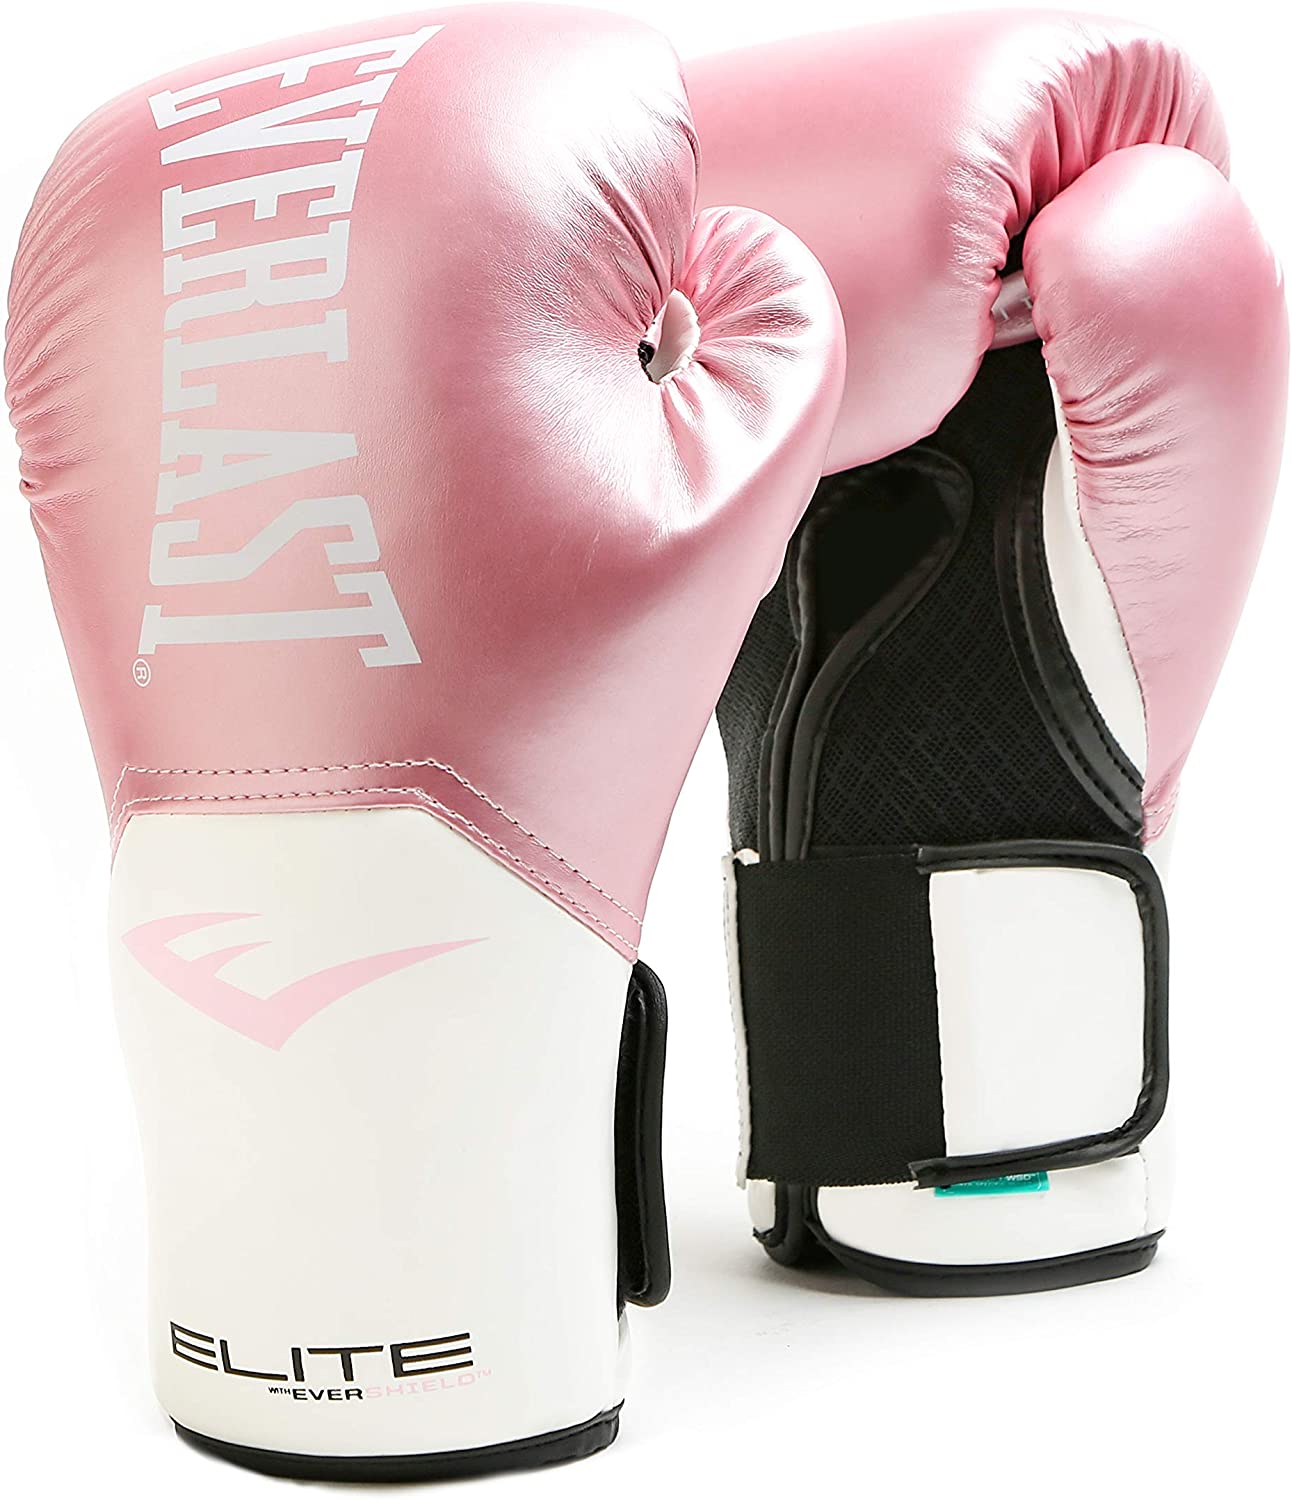 MITAINES FITNESS ROSE METAL BOXE à 10,99 €